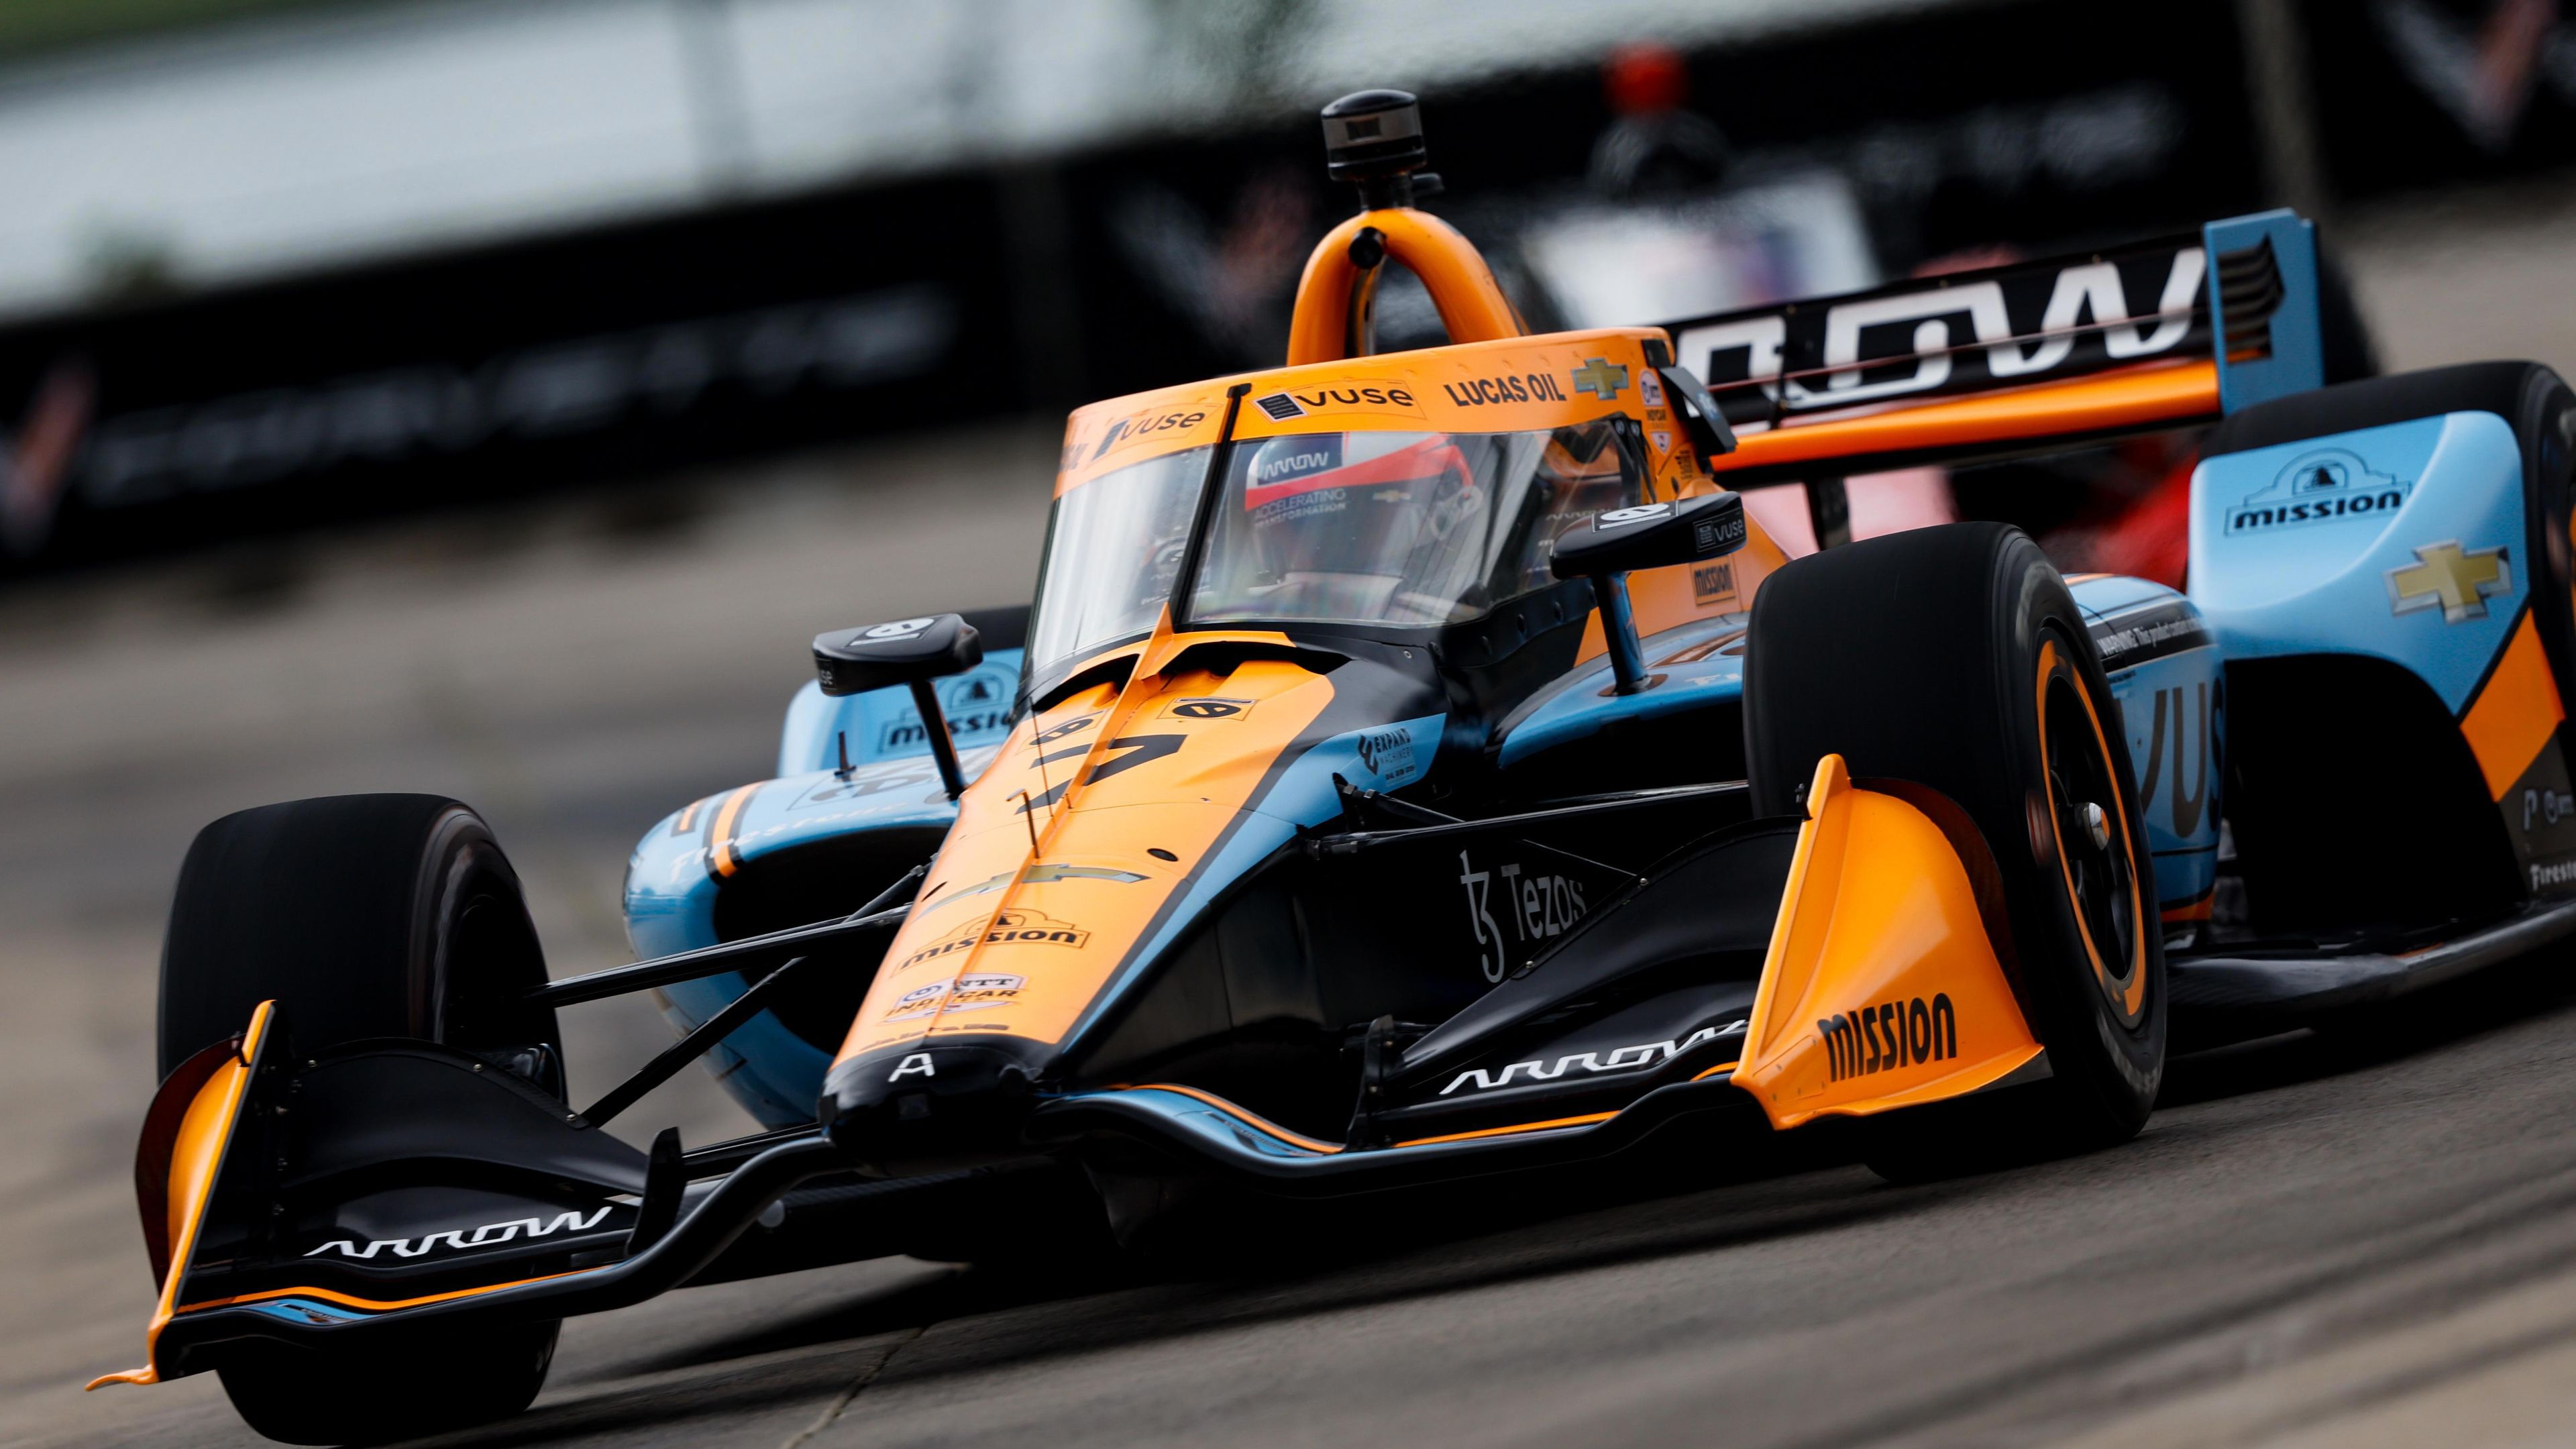 IndyCar's crazy contract saga takes another twist after questions are raised over McLaren